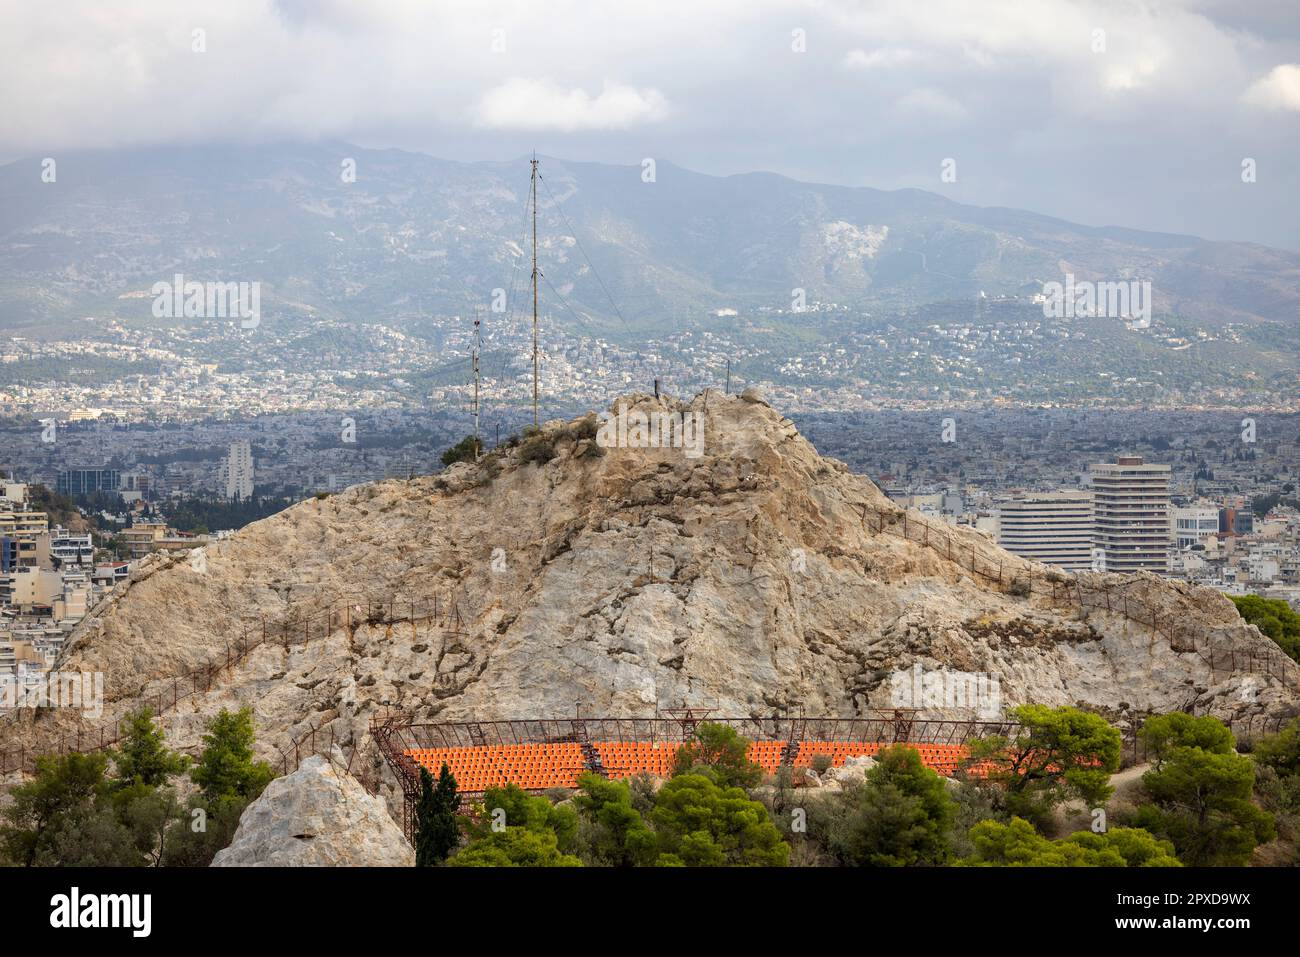 View from observation deck of Mount Lycabettus of open-air amphitheater, Lycabettus Theatre, Athens, Greece. Panorama of the city in the distance Stock Photo